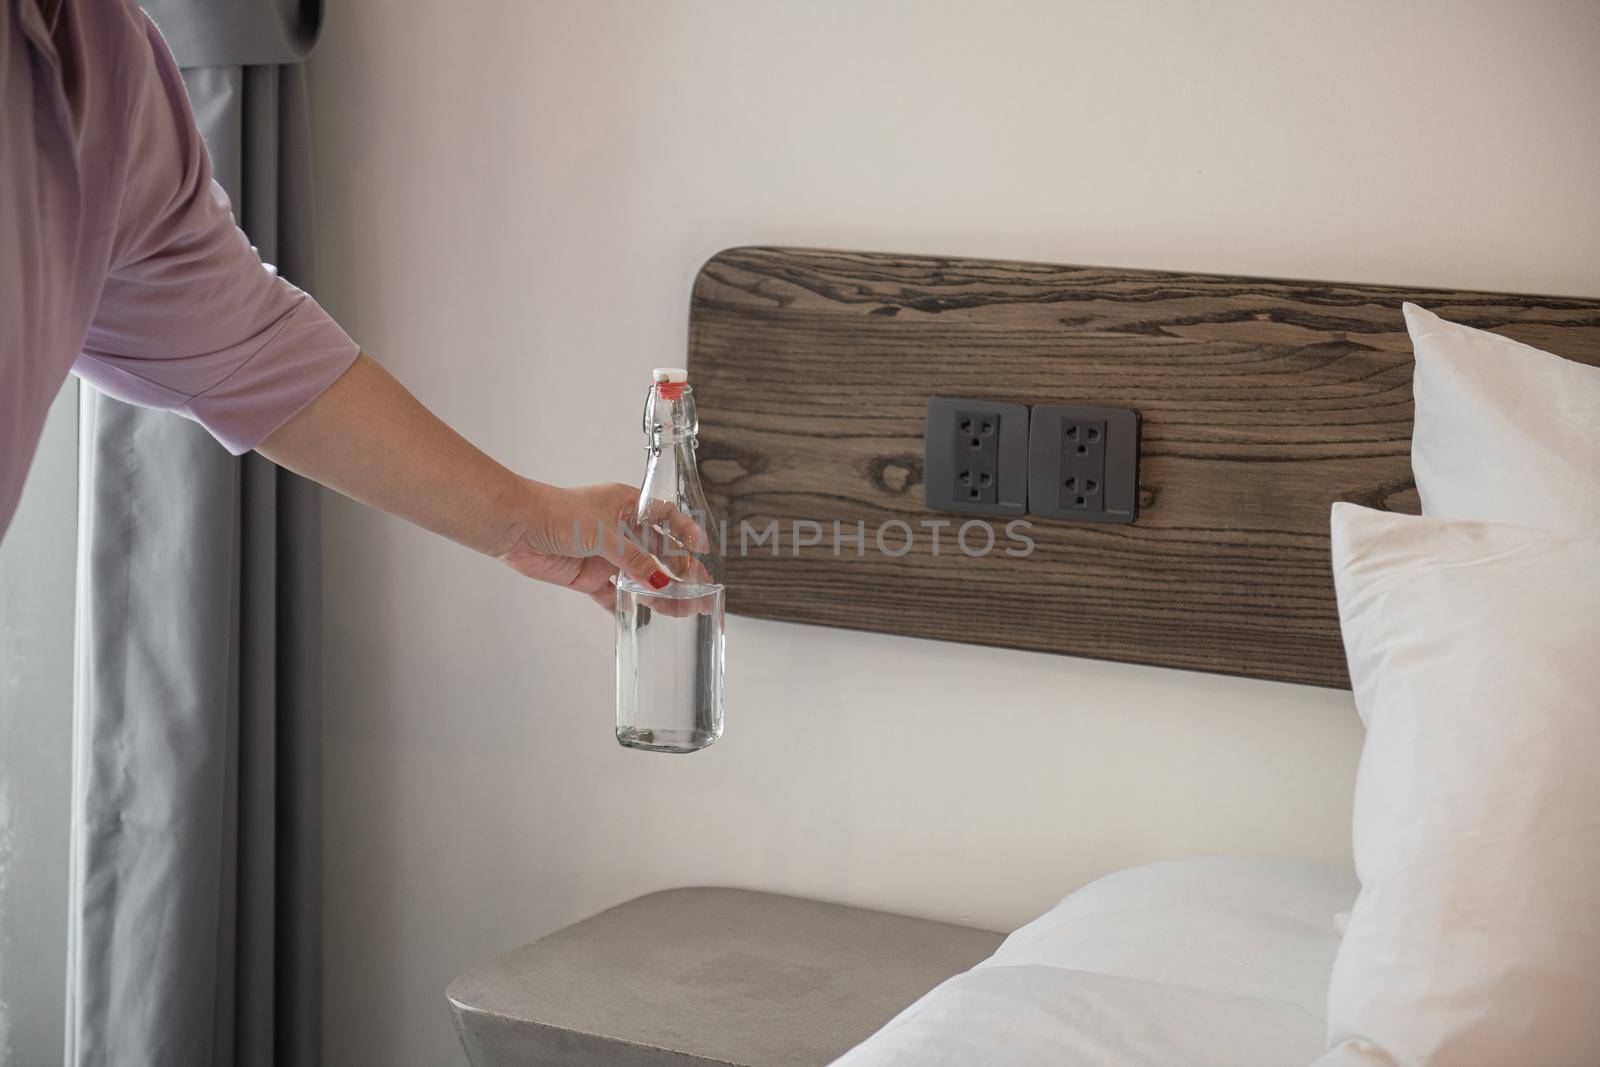 Housekeeper or Maid cleaning hotel room. Asian woman worker working in hotel and resort.